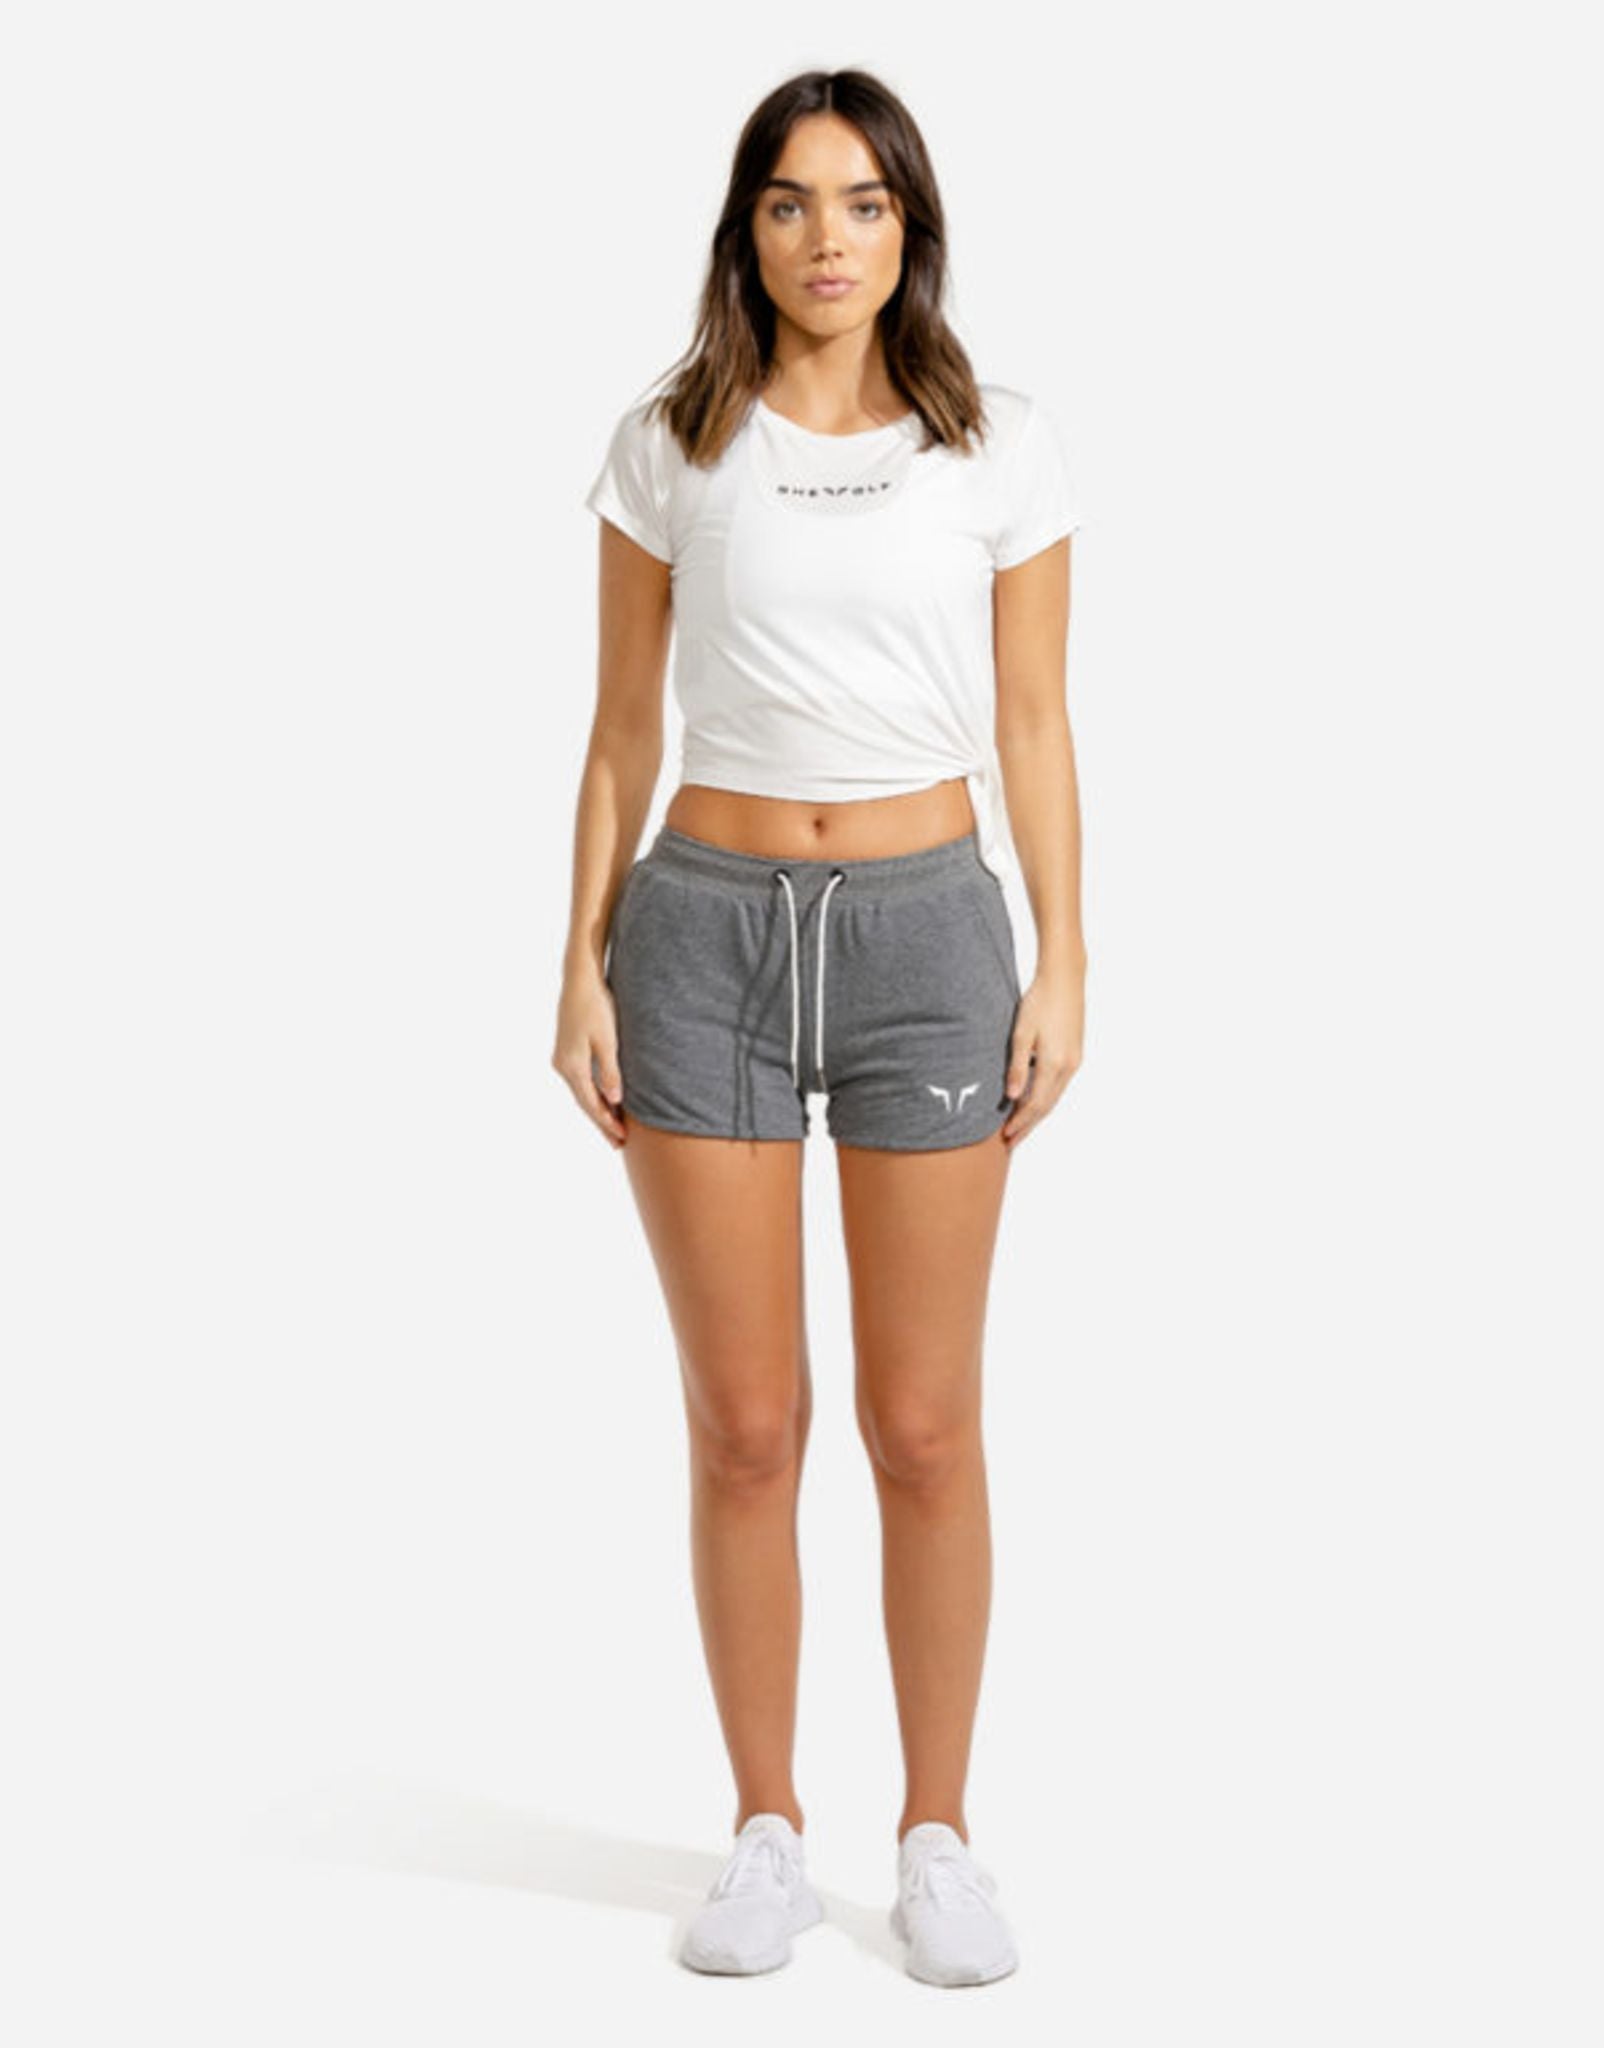 She Wolf Crop Top  - White